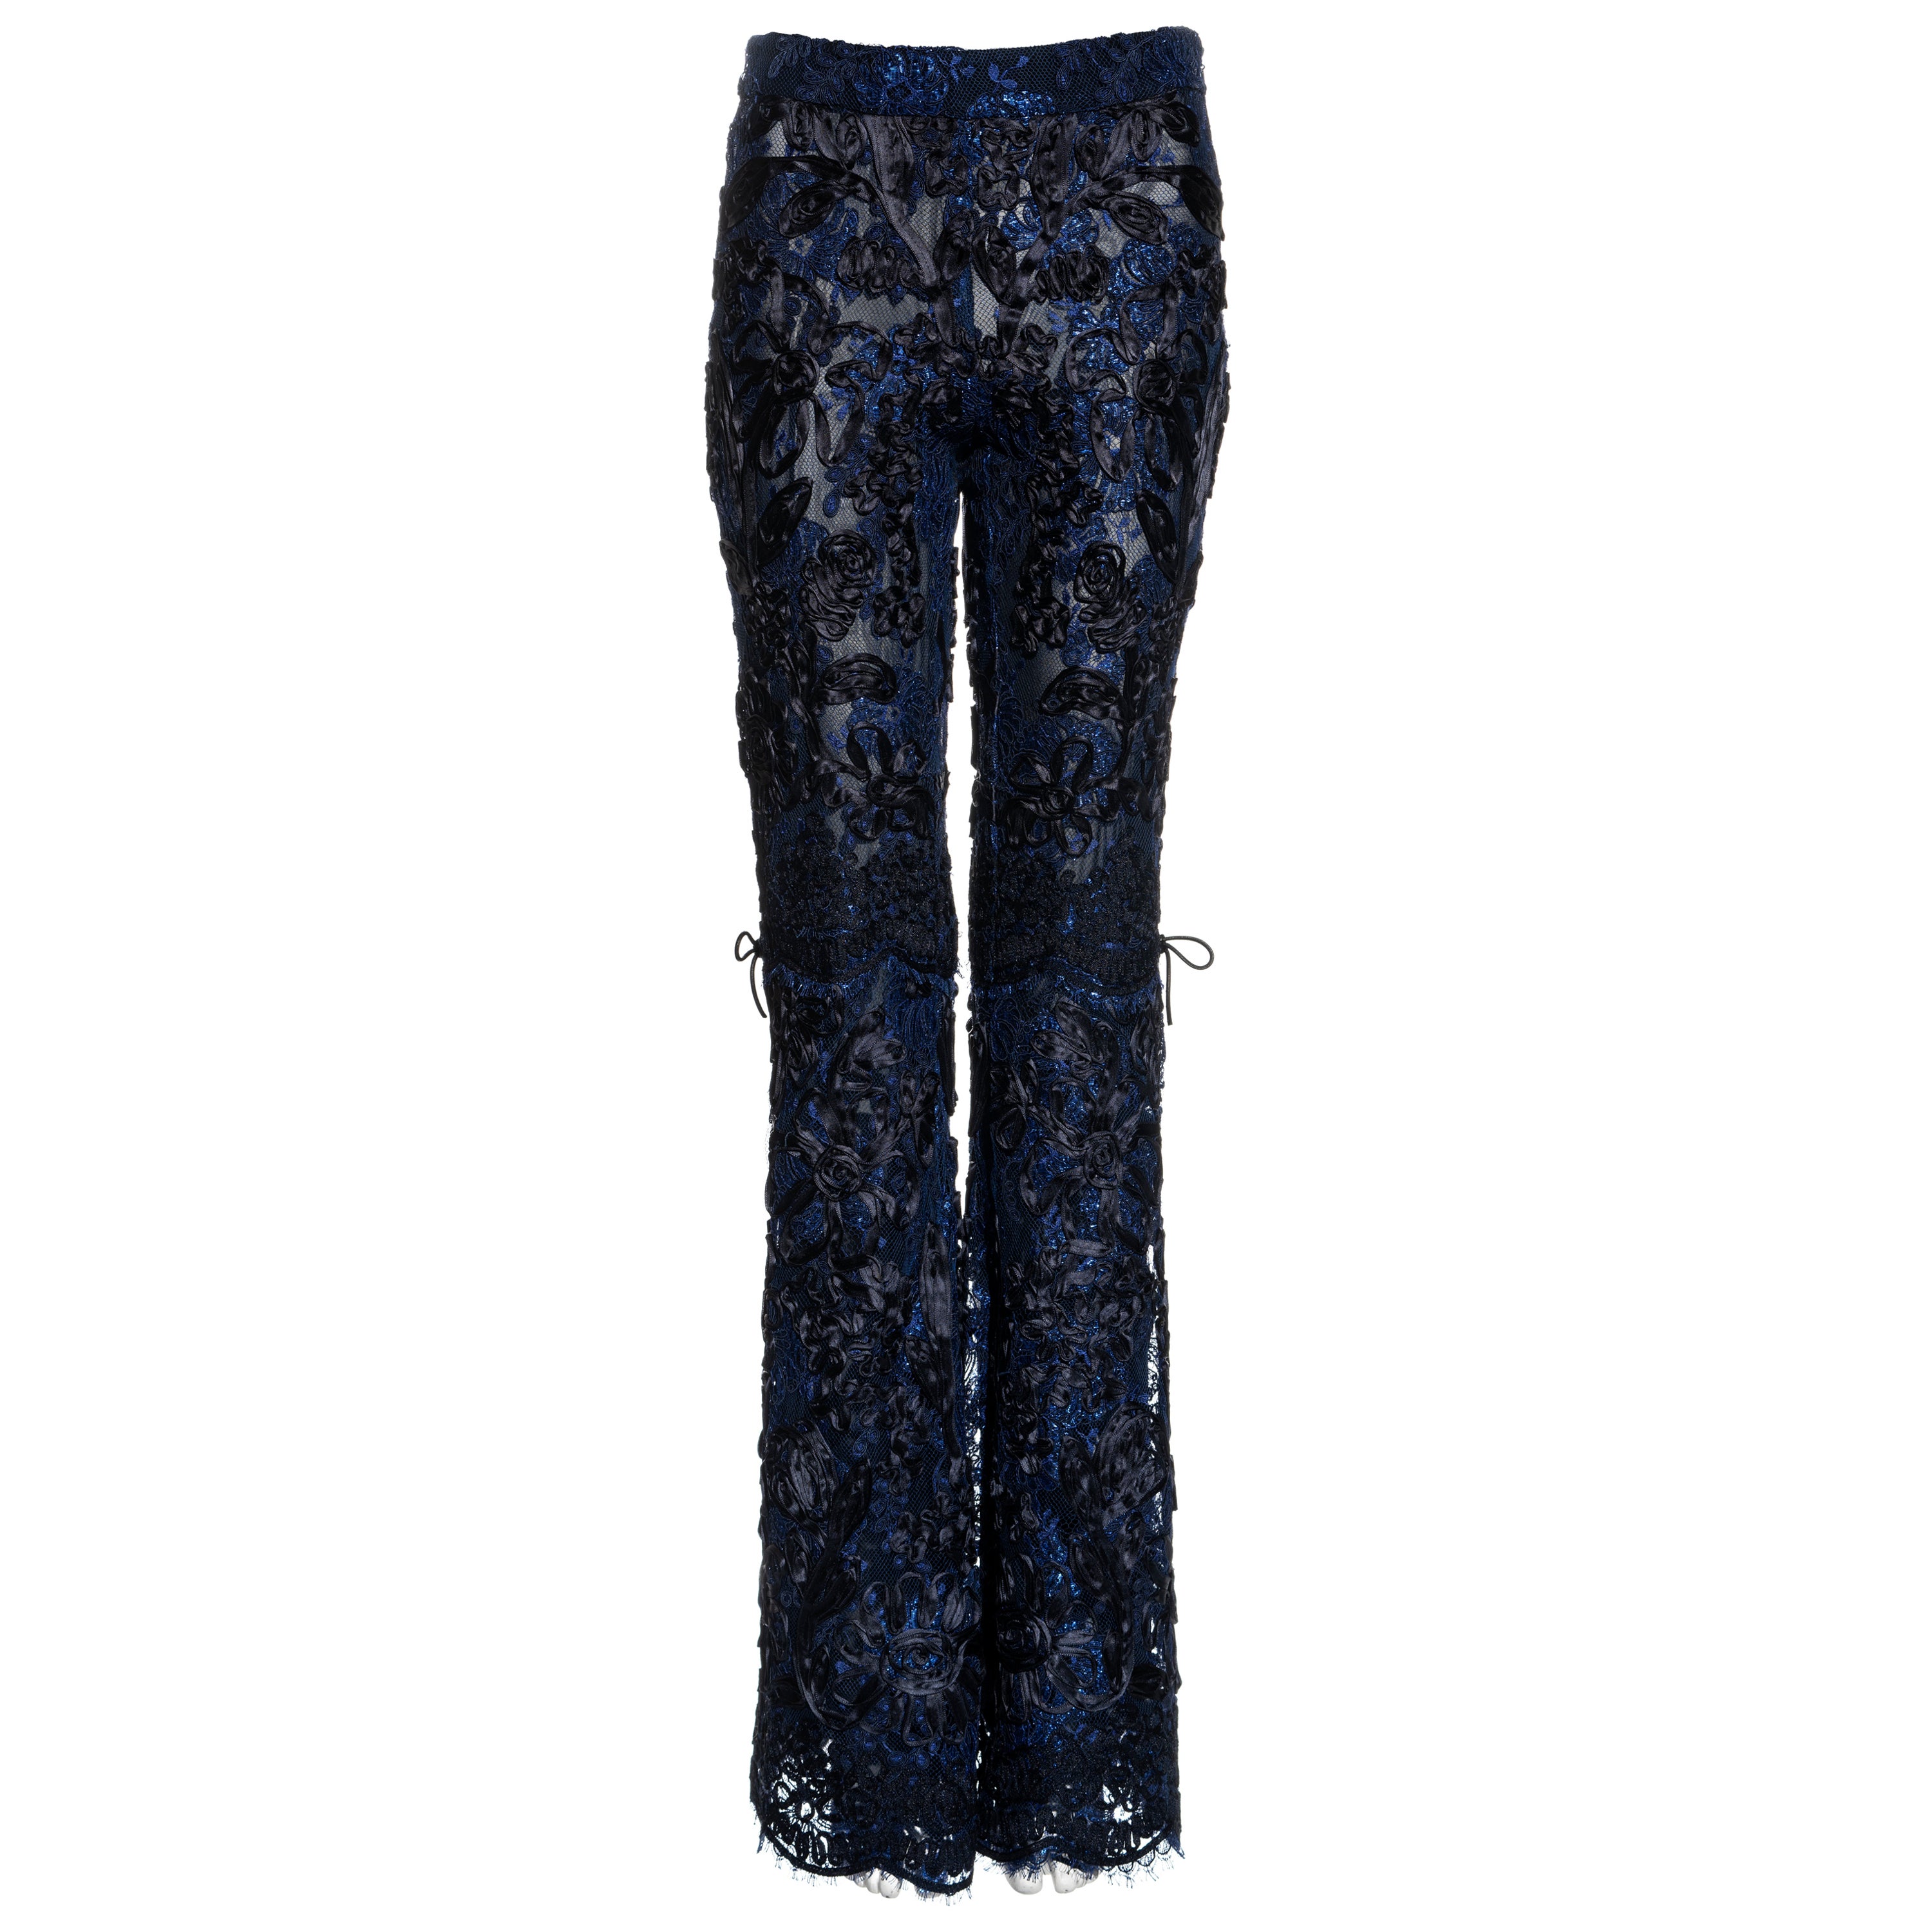 Gucci by Tom Ford blue and black lamé floral lace flared pants, fw 1999